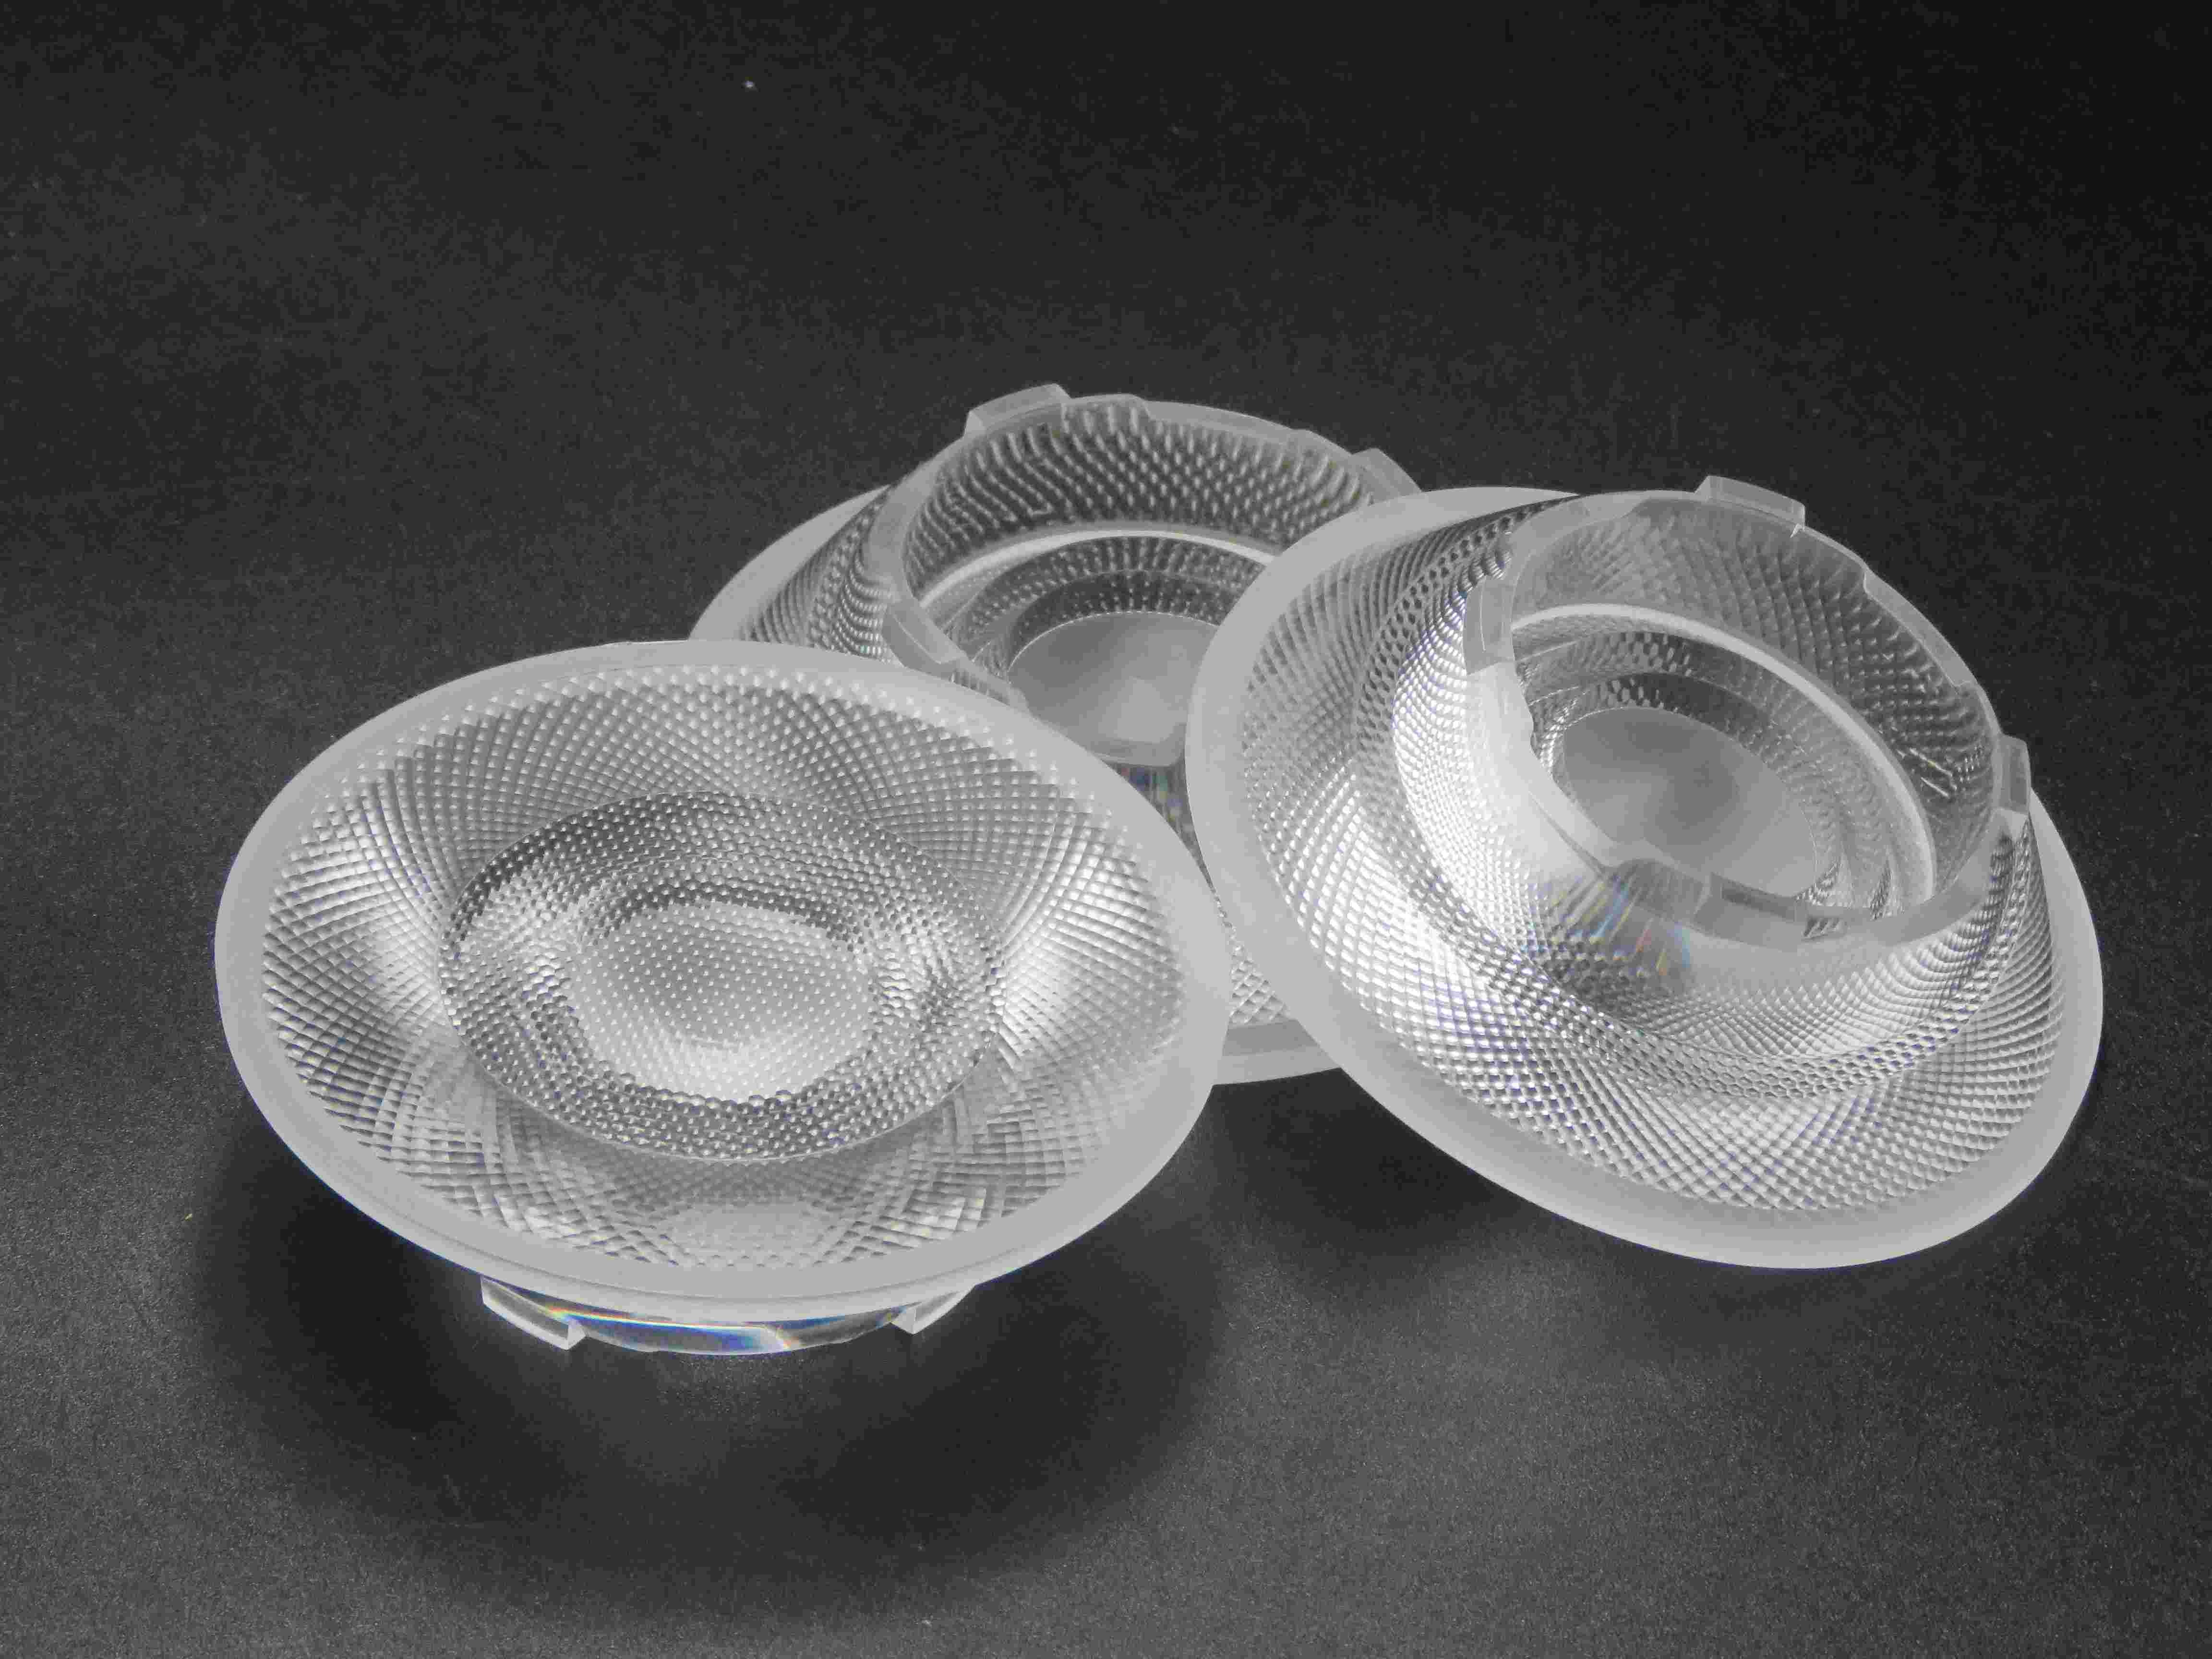 What is the difference between led lens and ordinary LED?